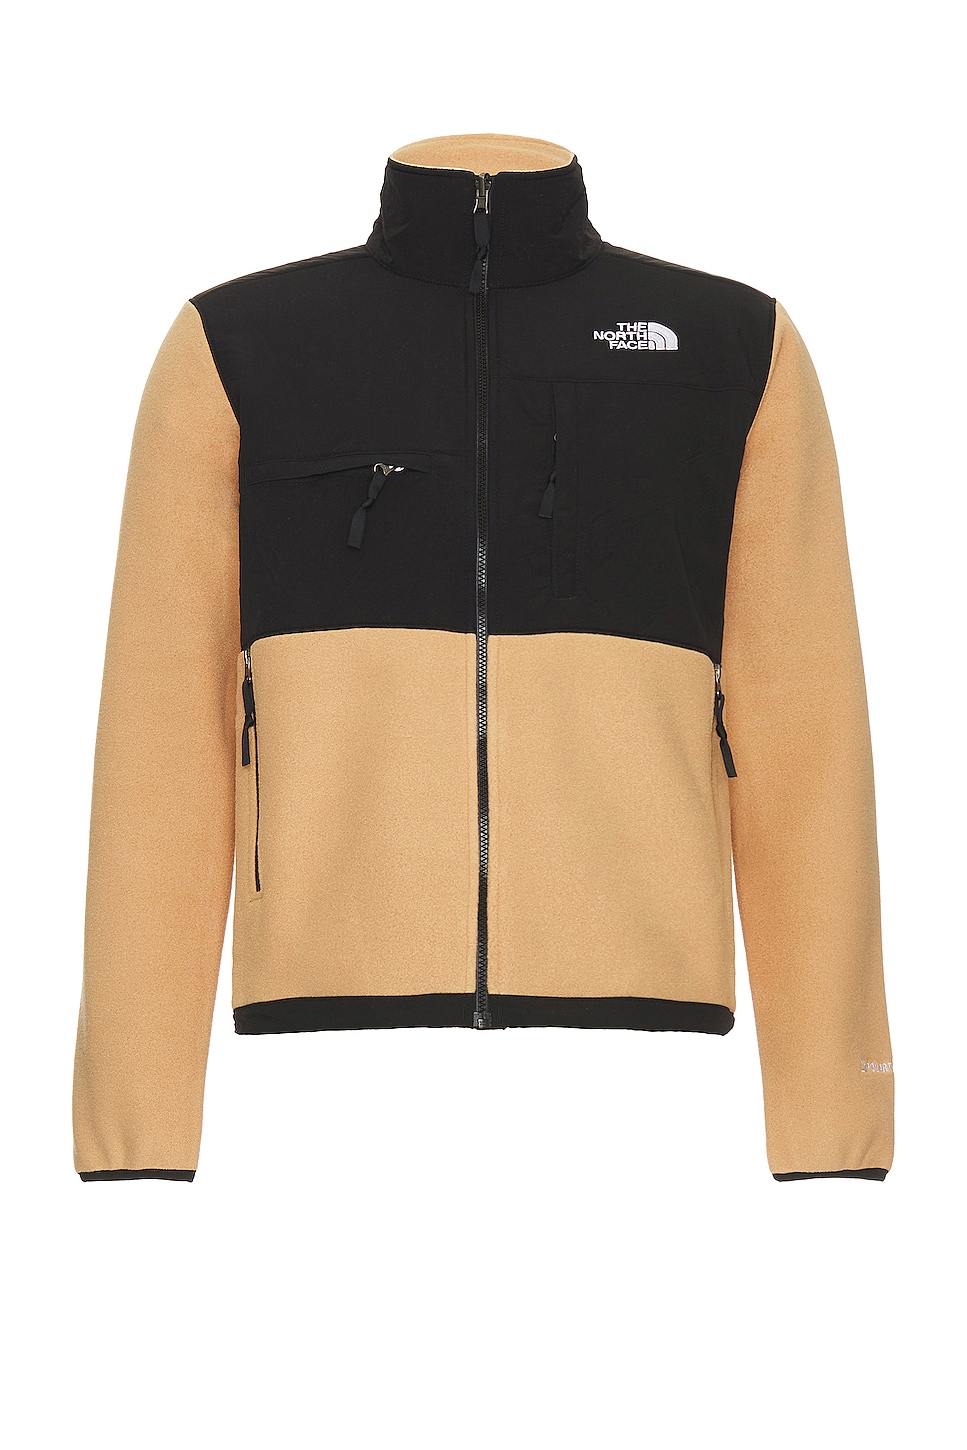 Куртка The North Face Denali, цвет Almond Butter & Tnf Black куртка the north face freedom insulated plus цвет tnf black almond butter